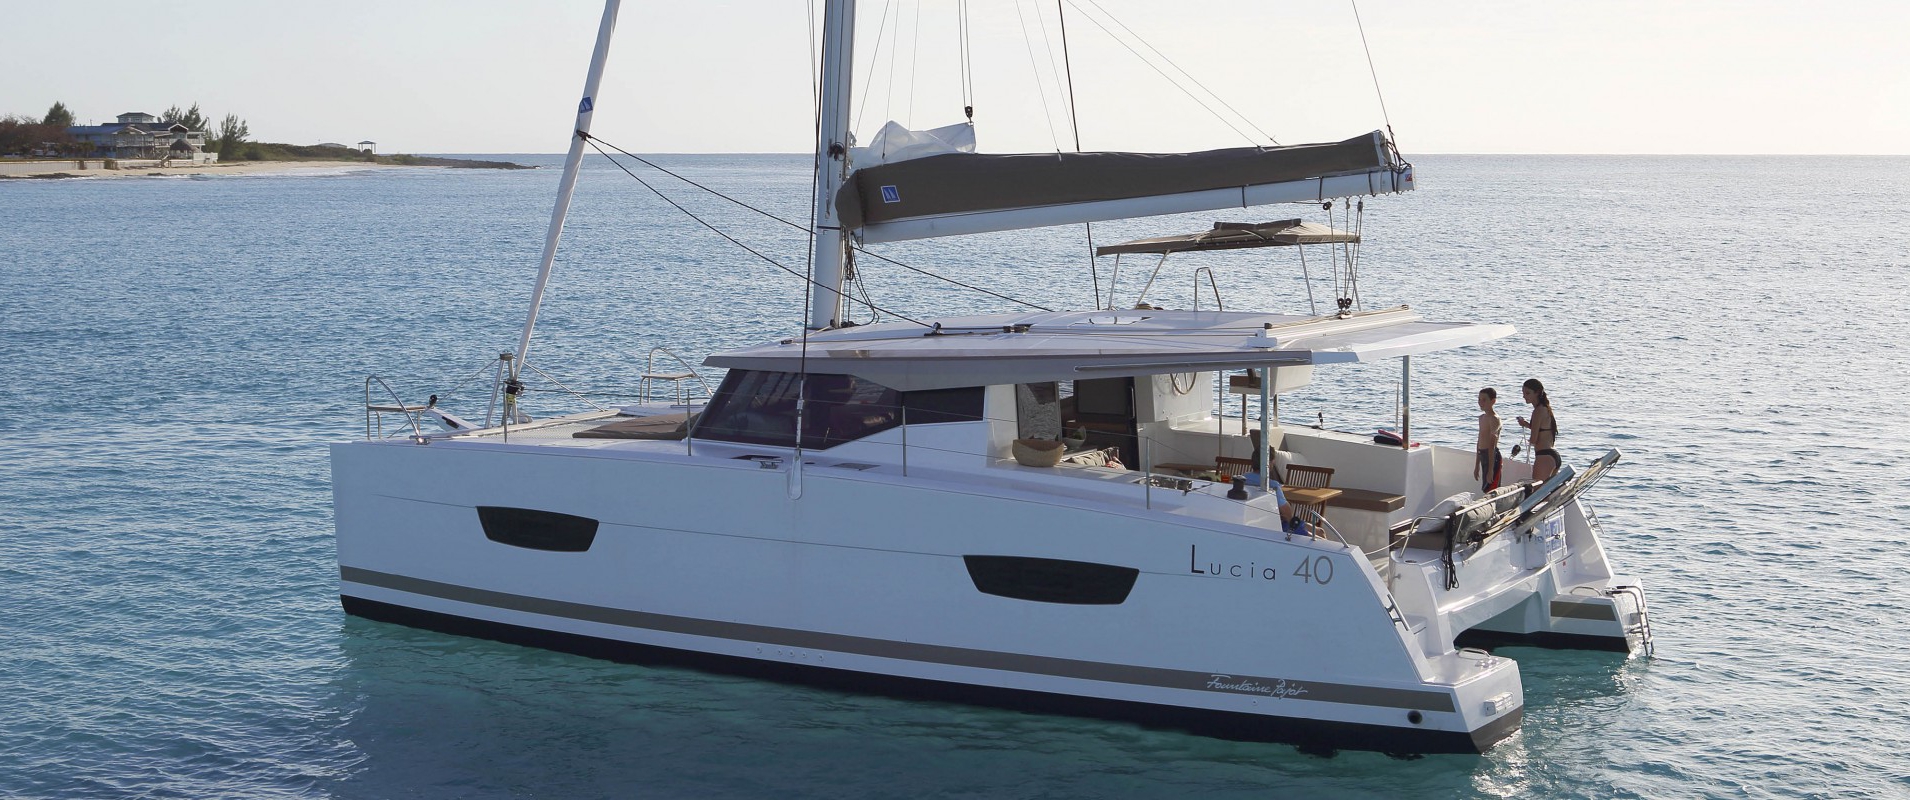 Istion Yachting Fountaine Pajot Lucia 40 Fortuna Catamaran in Kos